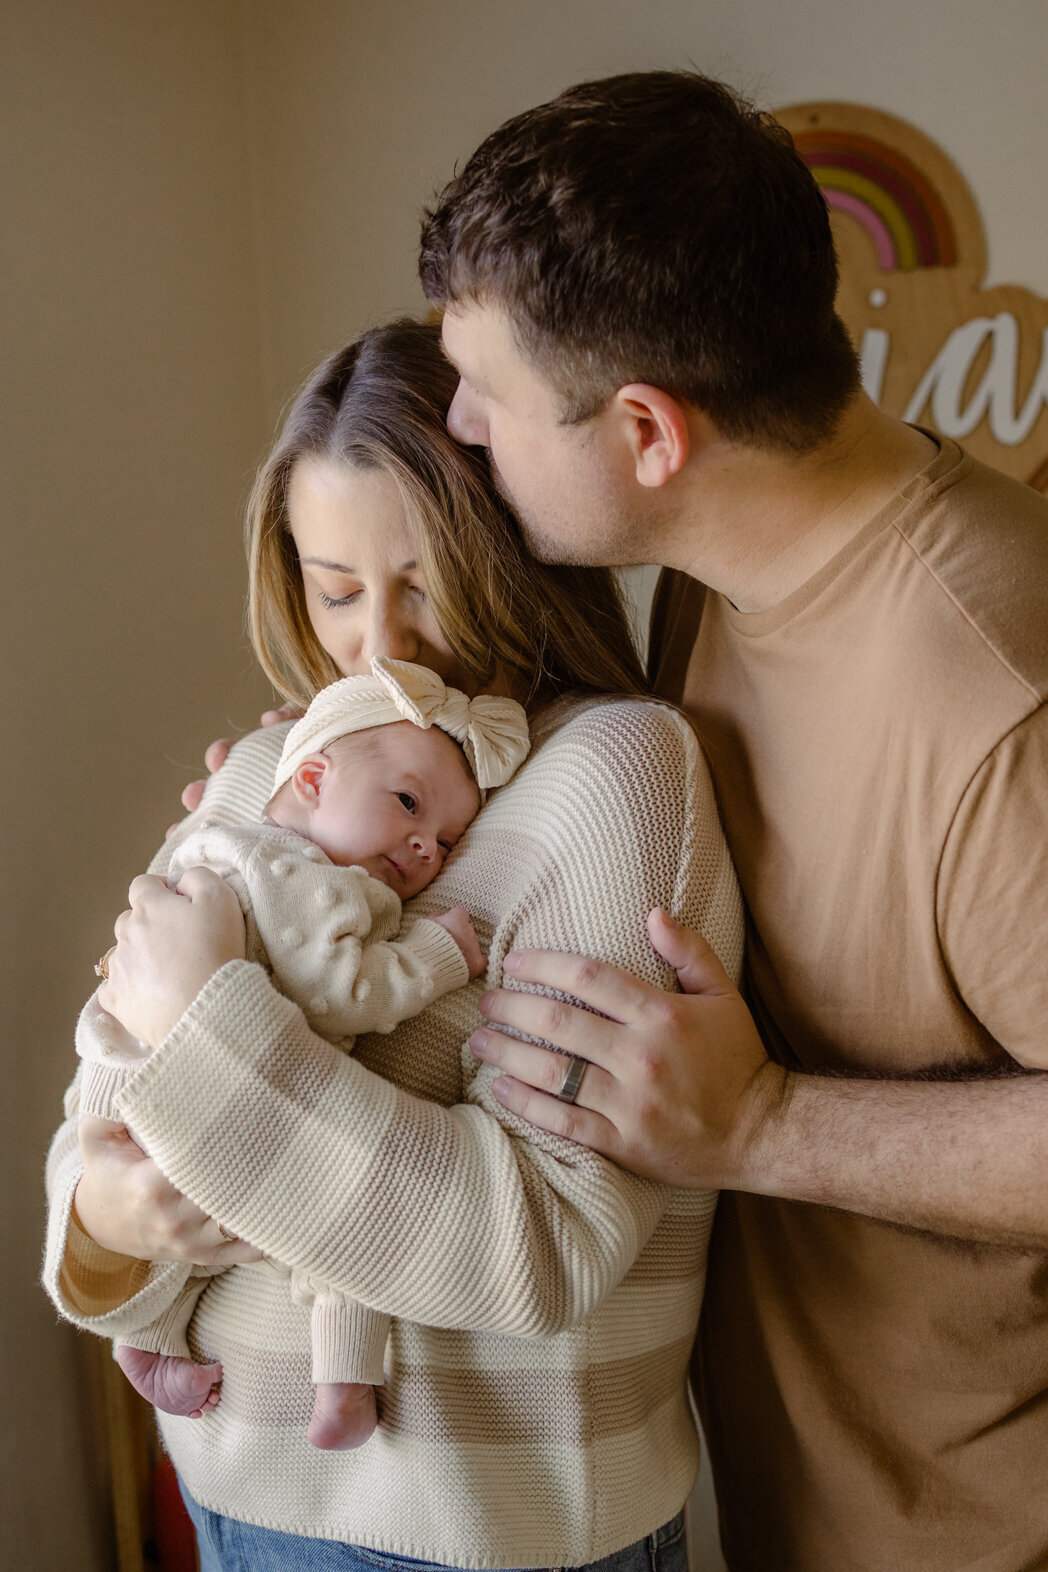 Sentimental in home newborn sessions that make you feel the tender moments of snuggling your beautiful new baby for decades to come